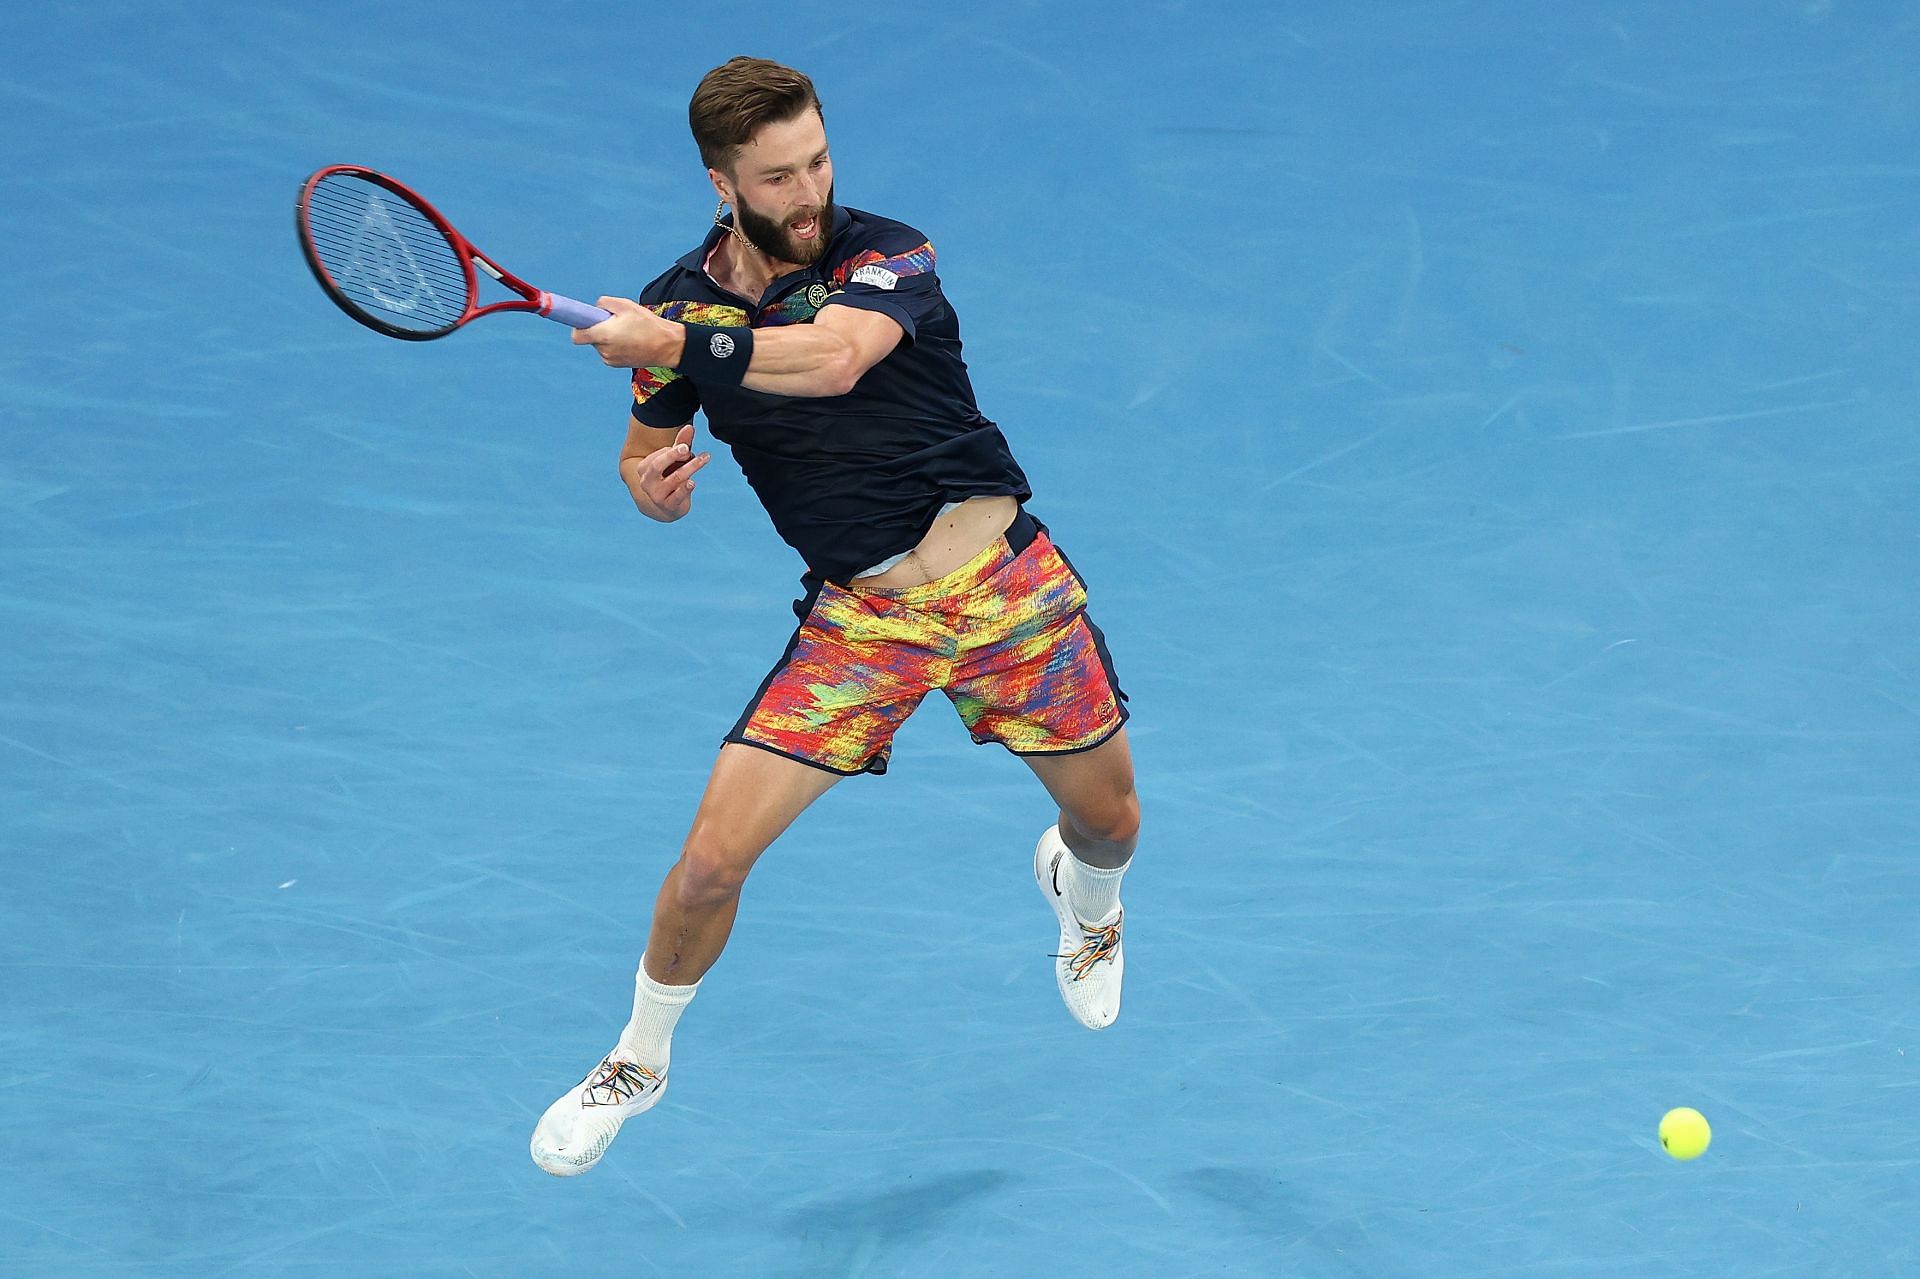 Liam Broady hits a forehand at the 2022 Australian Open